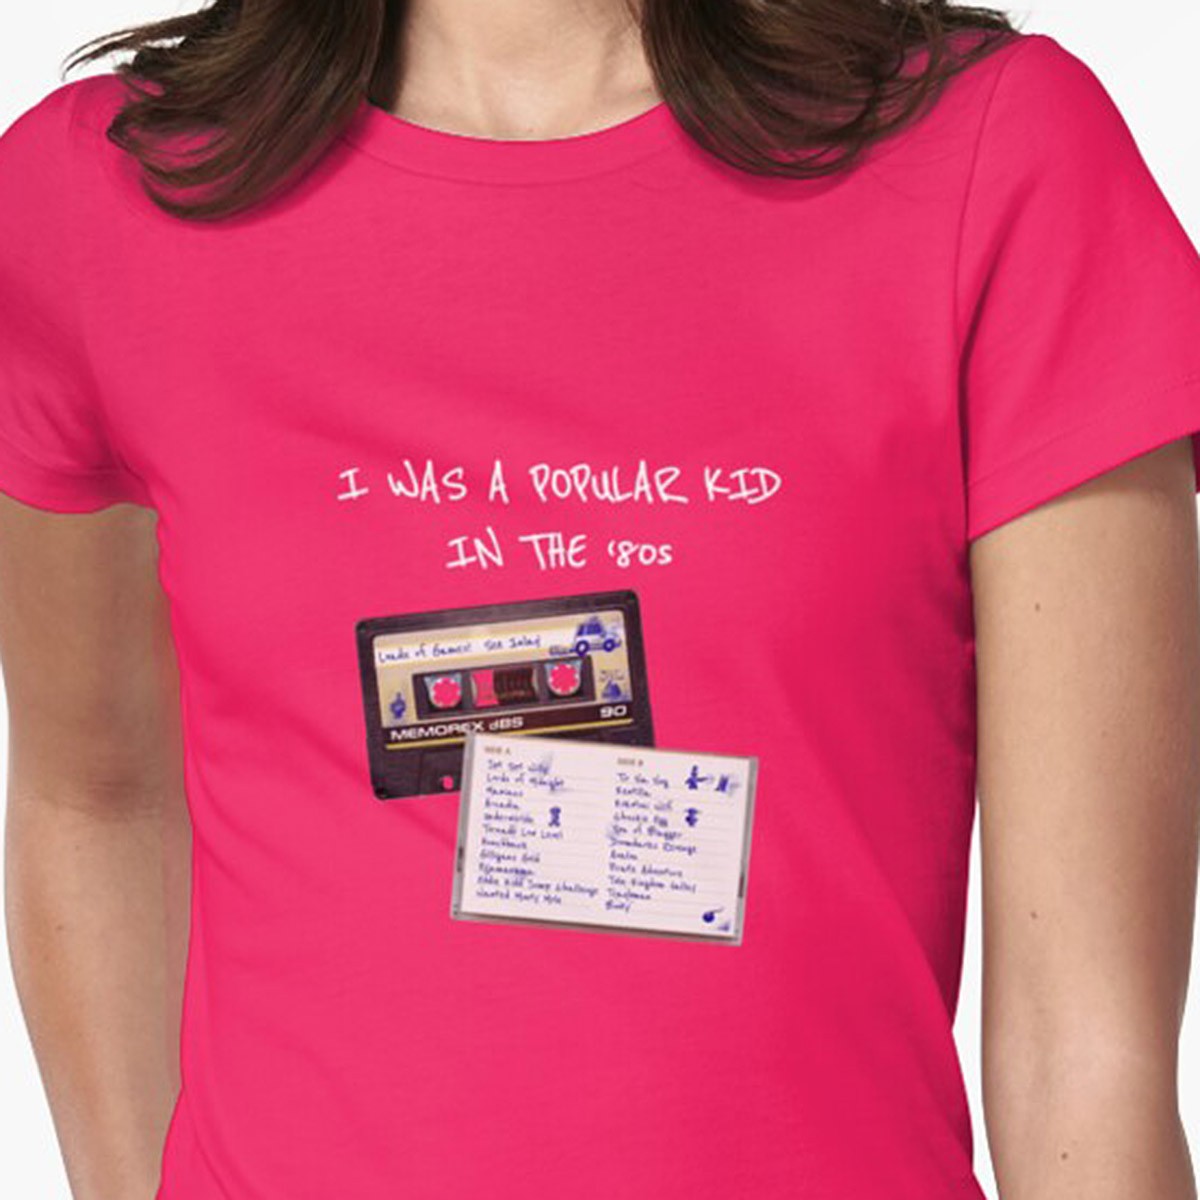 I Was a Popular Kid in the '80s! Fitted Tee - 